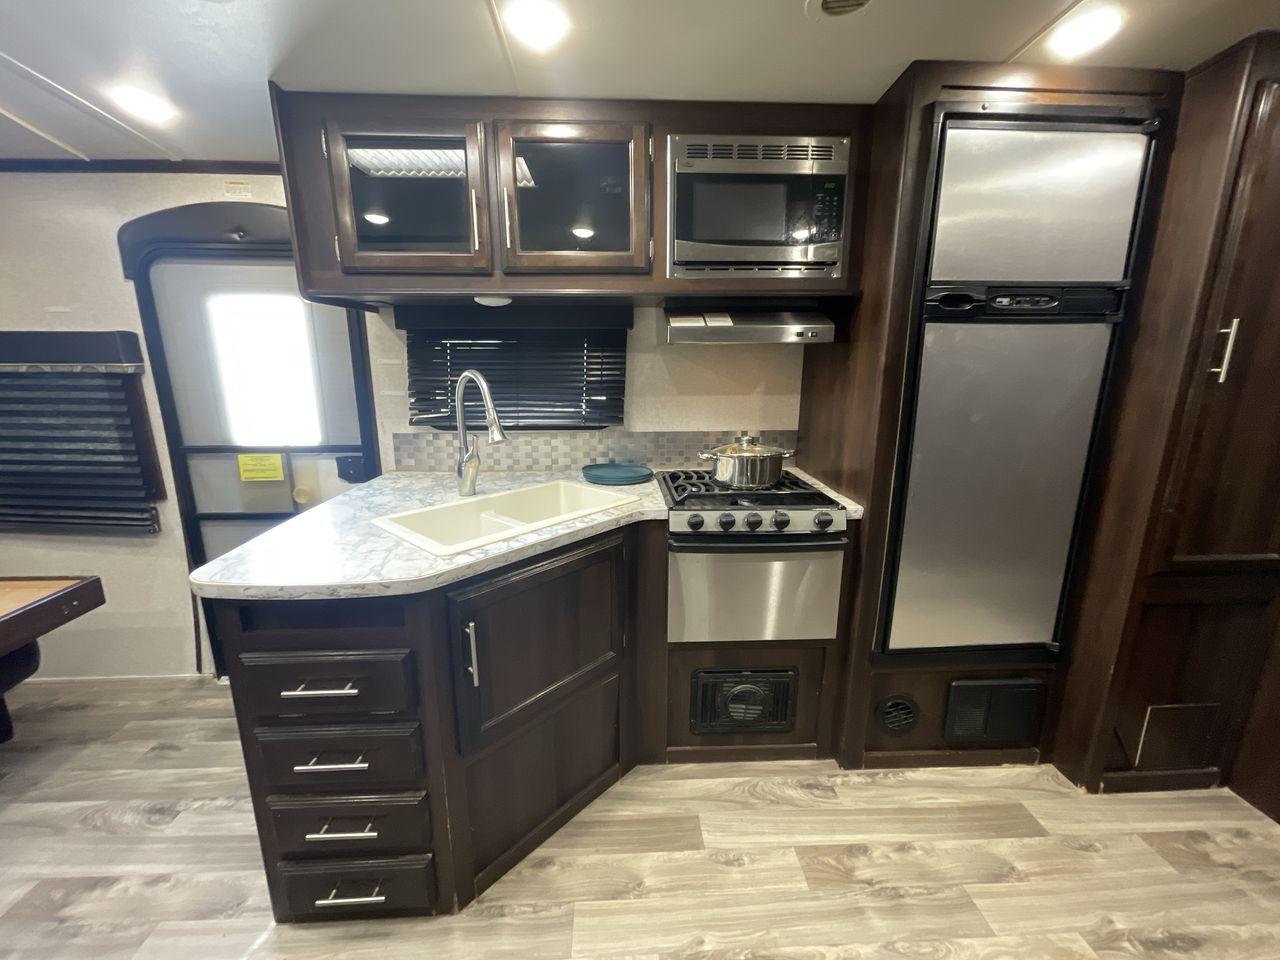 2018 WHITE JAYCO JAY FLIGHT 23MRB (1UJBJ0BN5J1) , Length: 28.17 ft | Dry Weight: 5,560 lbs. | Gross Weight: 7,250 lbs. | Slides: 1 transmission, located at 4319 N Main St, Cleburne, TX, 76033, (817) 678-5133, 32.385960, -97.391212 - The 2018 Jayco Jay Flight 23MRB is a travel trailer that encapsulates both compactness and luxury for unparalleled camping experiences. Spanning 28 feet in length, this model boasts a thoughtfully arranged interior featuring a single slide-out, seamlessly amplifying the living space. The Jay Flight - Photo #10